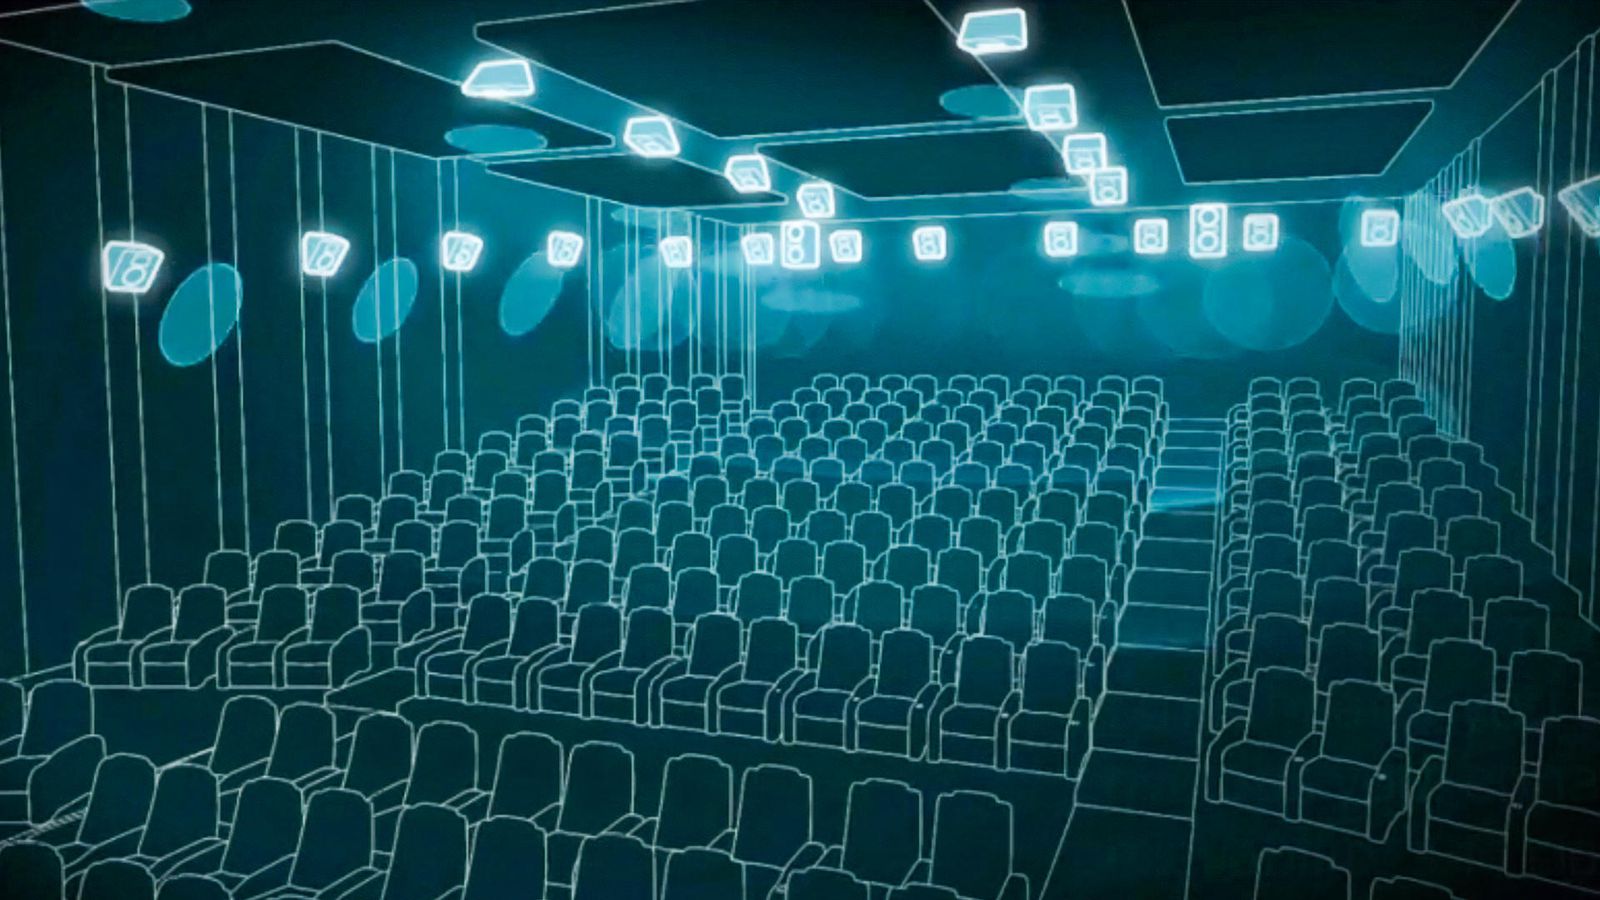 what is dolby atmos